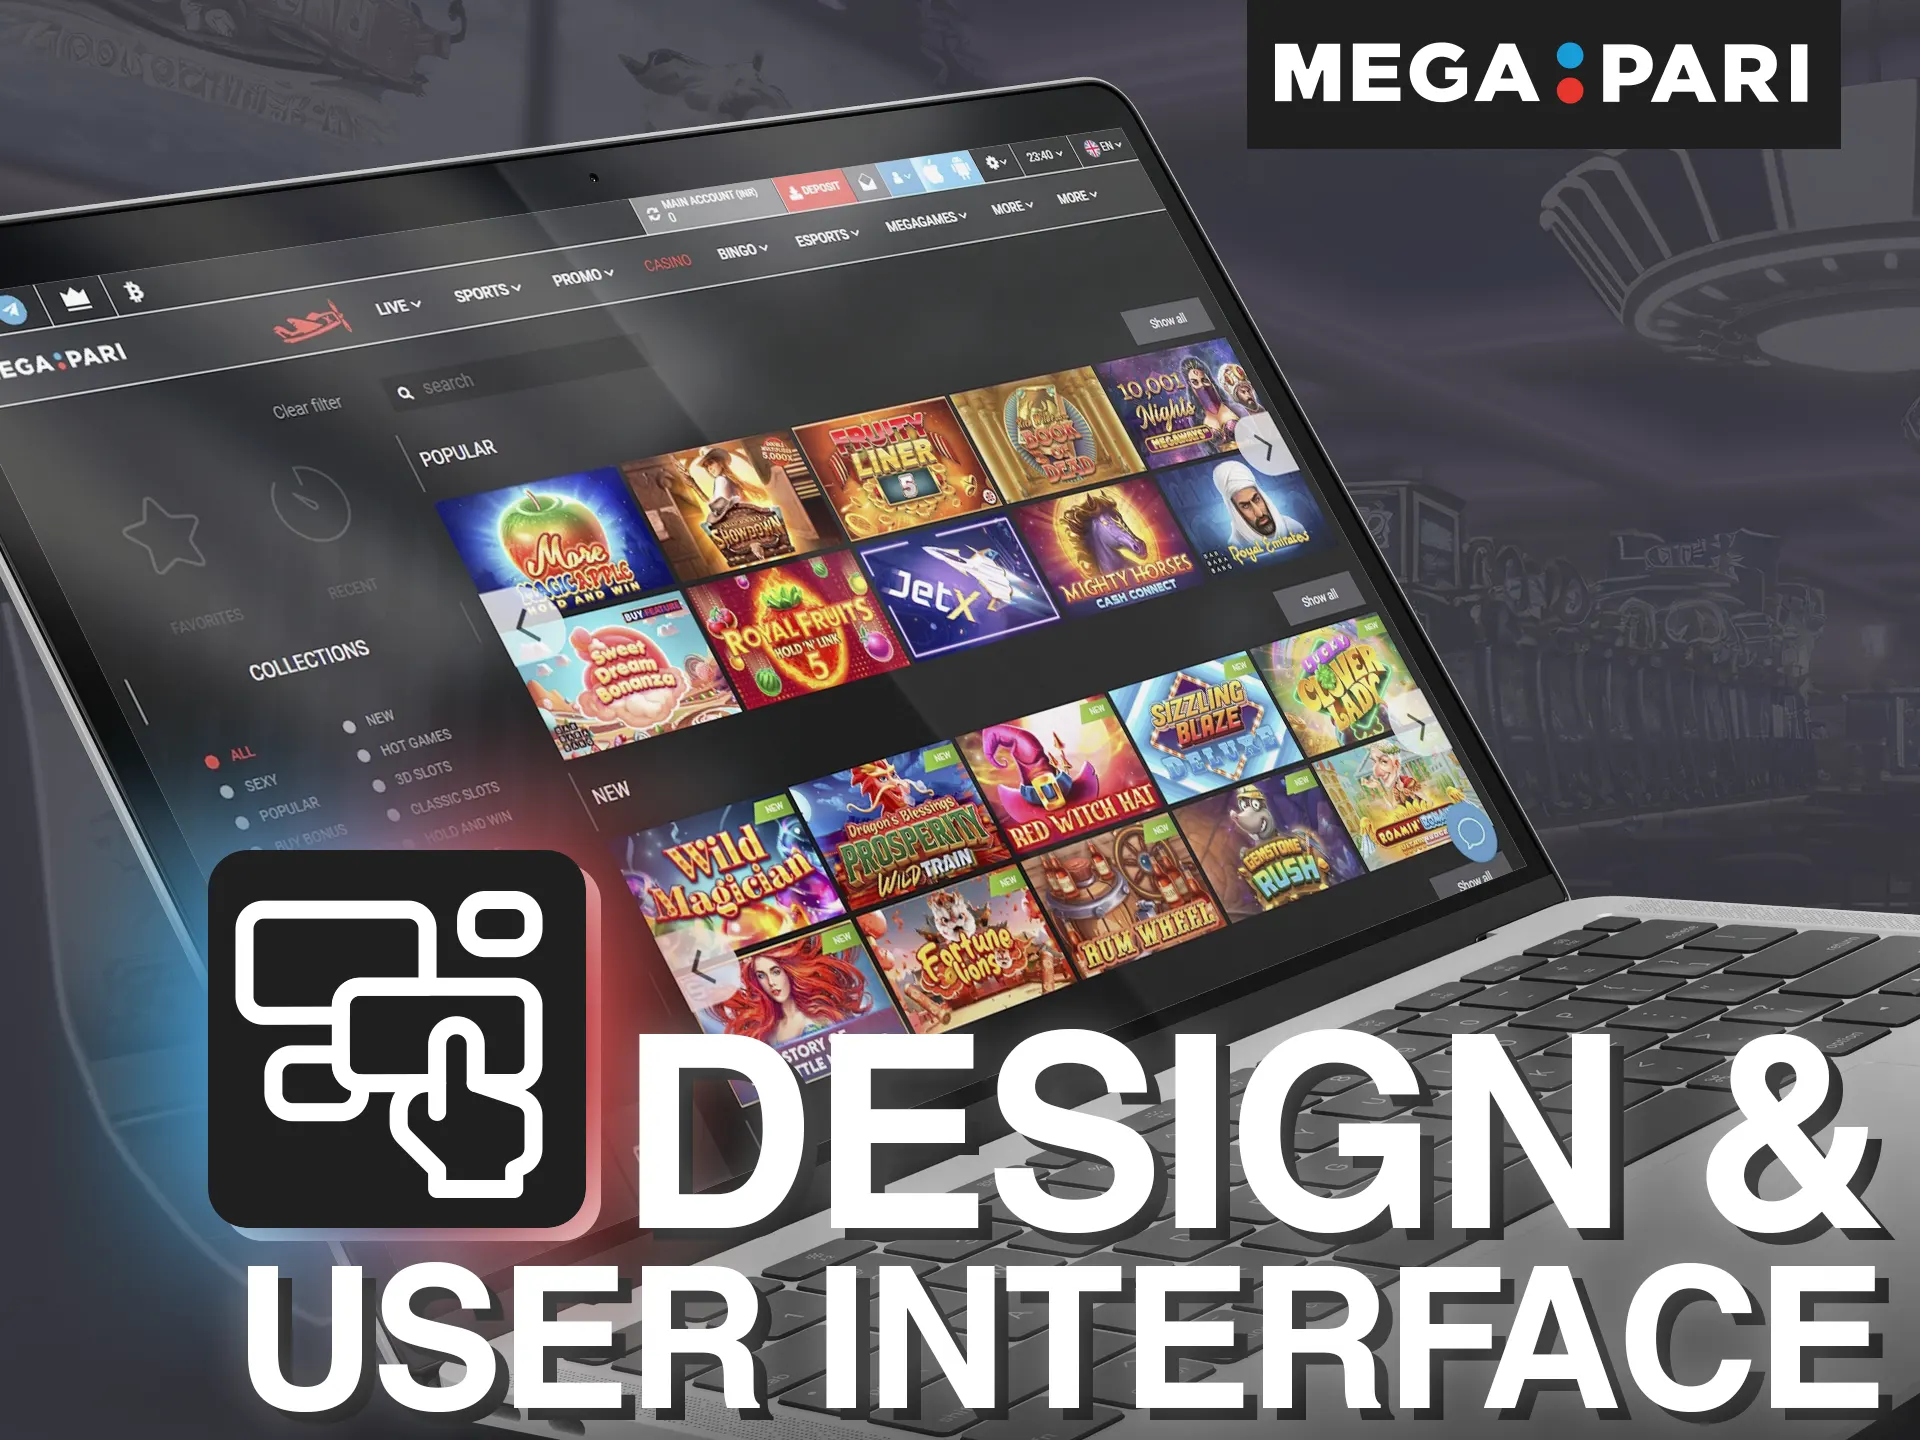 The user interface and the Megapari casino site are appealing with a modern, elegant design.